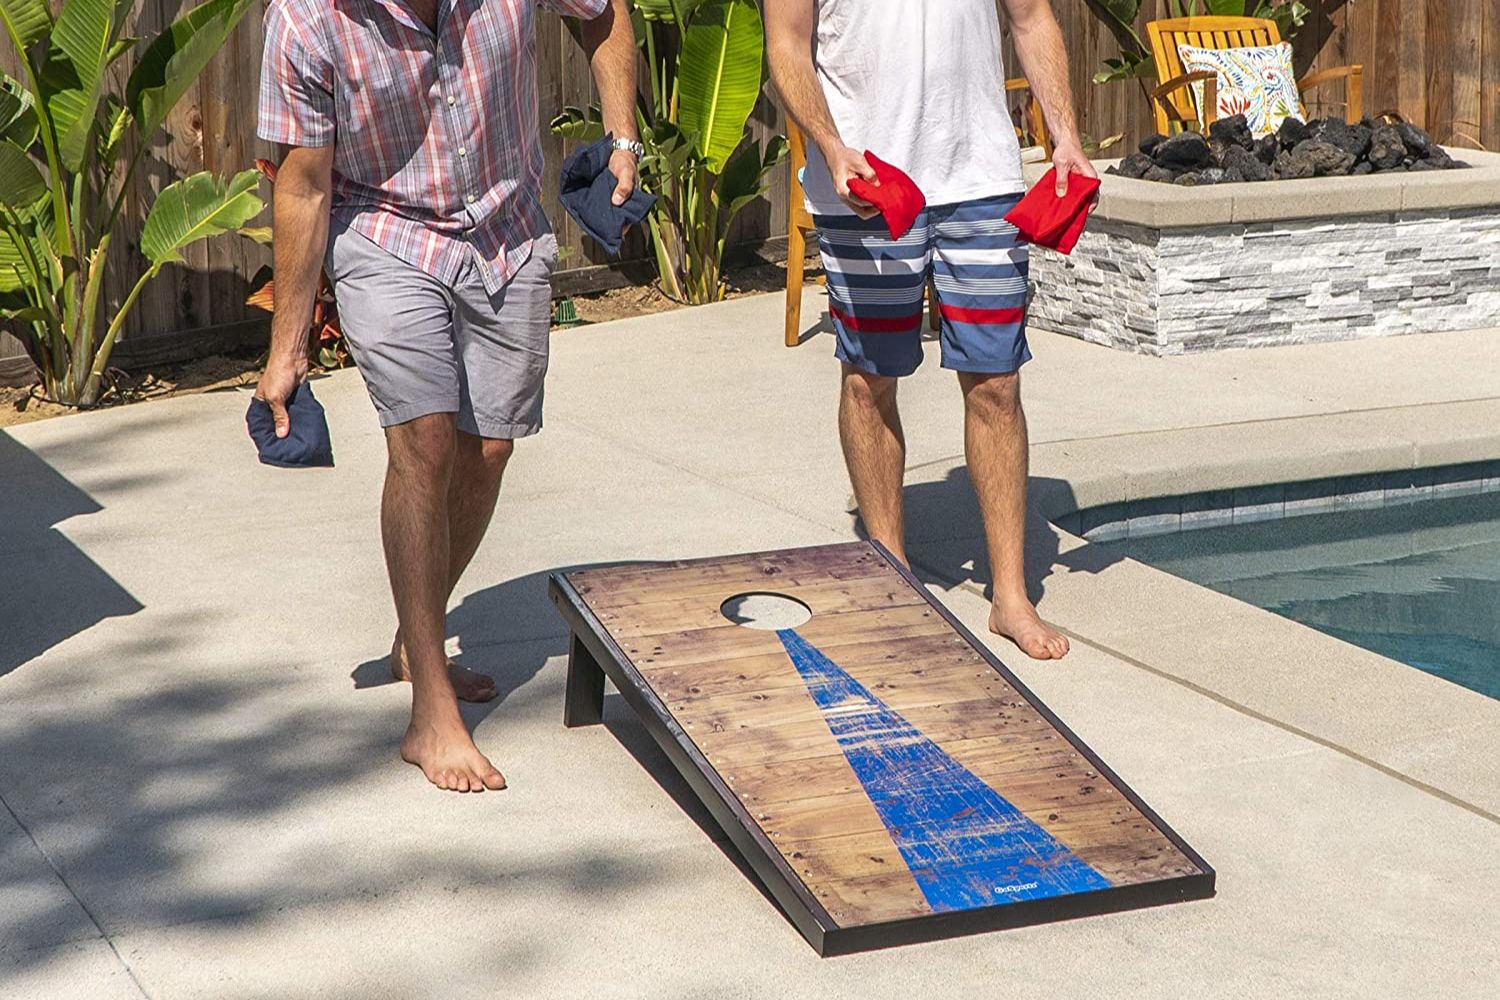 Everything You Need for a Backyard Cookout Options: GoSports Classic Cornhole Set